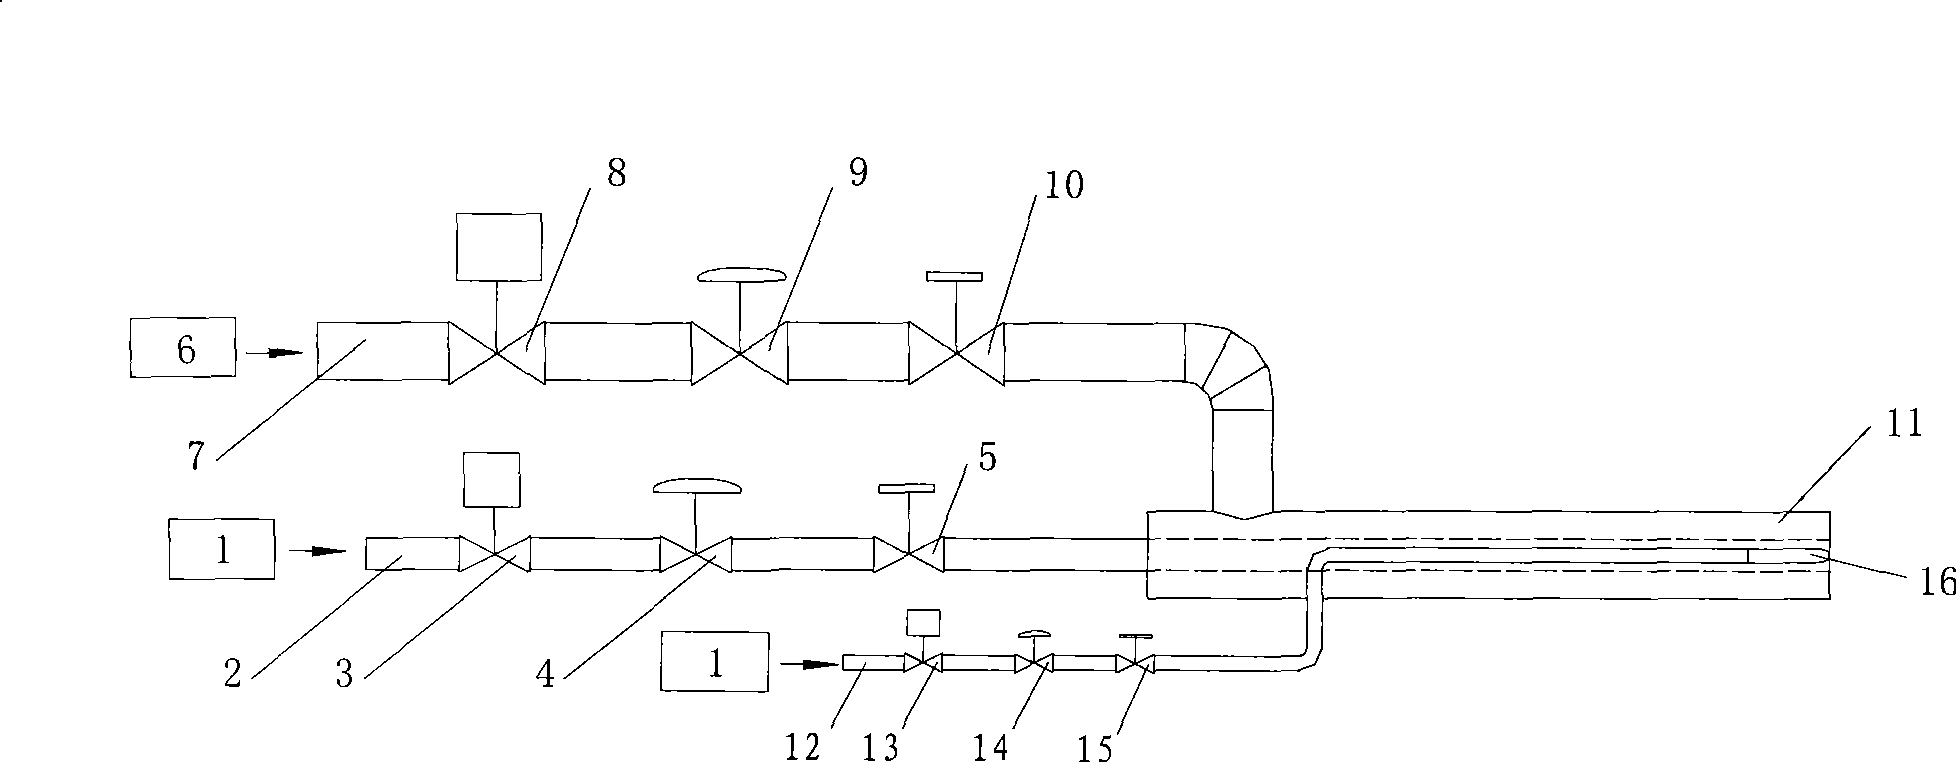 Fuel step adding apparatus of glass melter total oxygen combustion